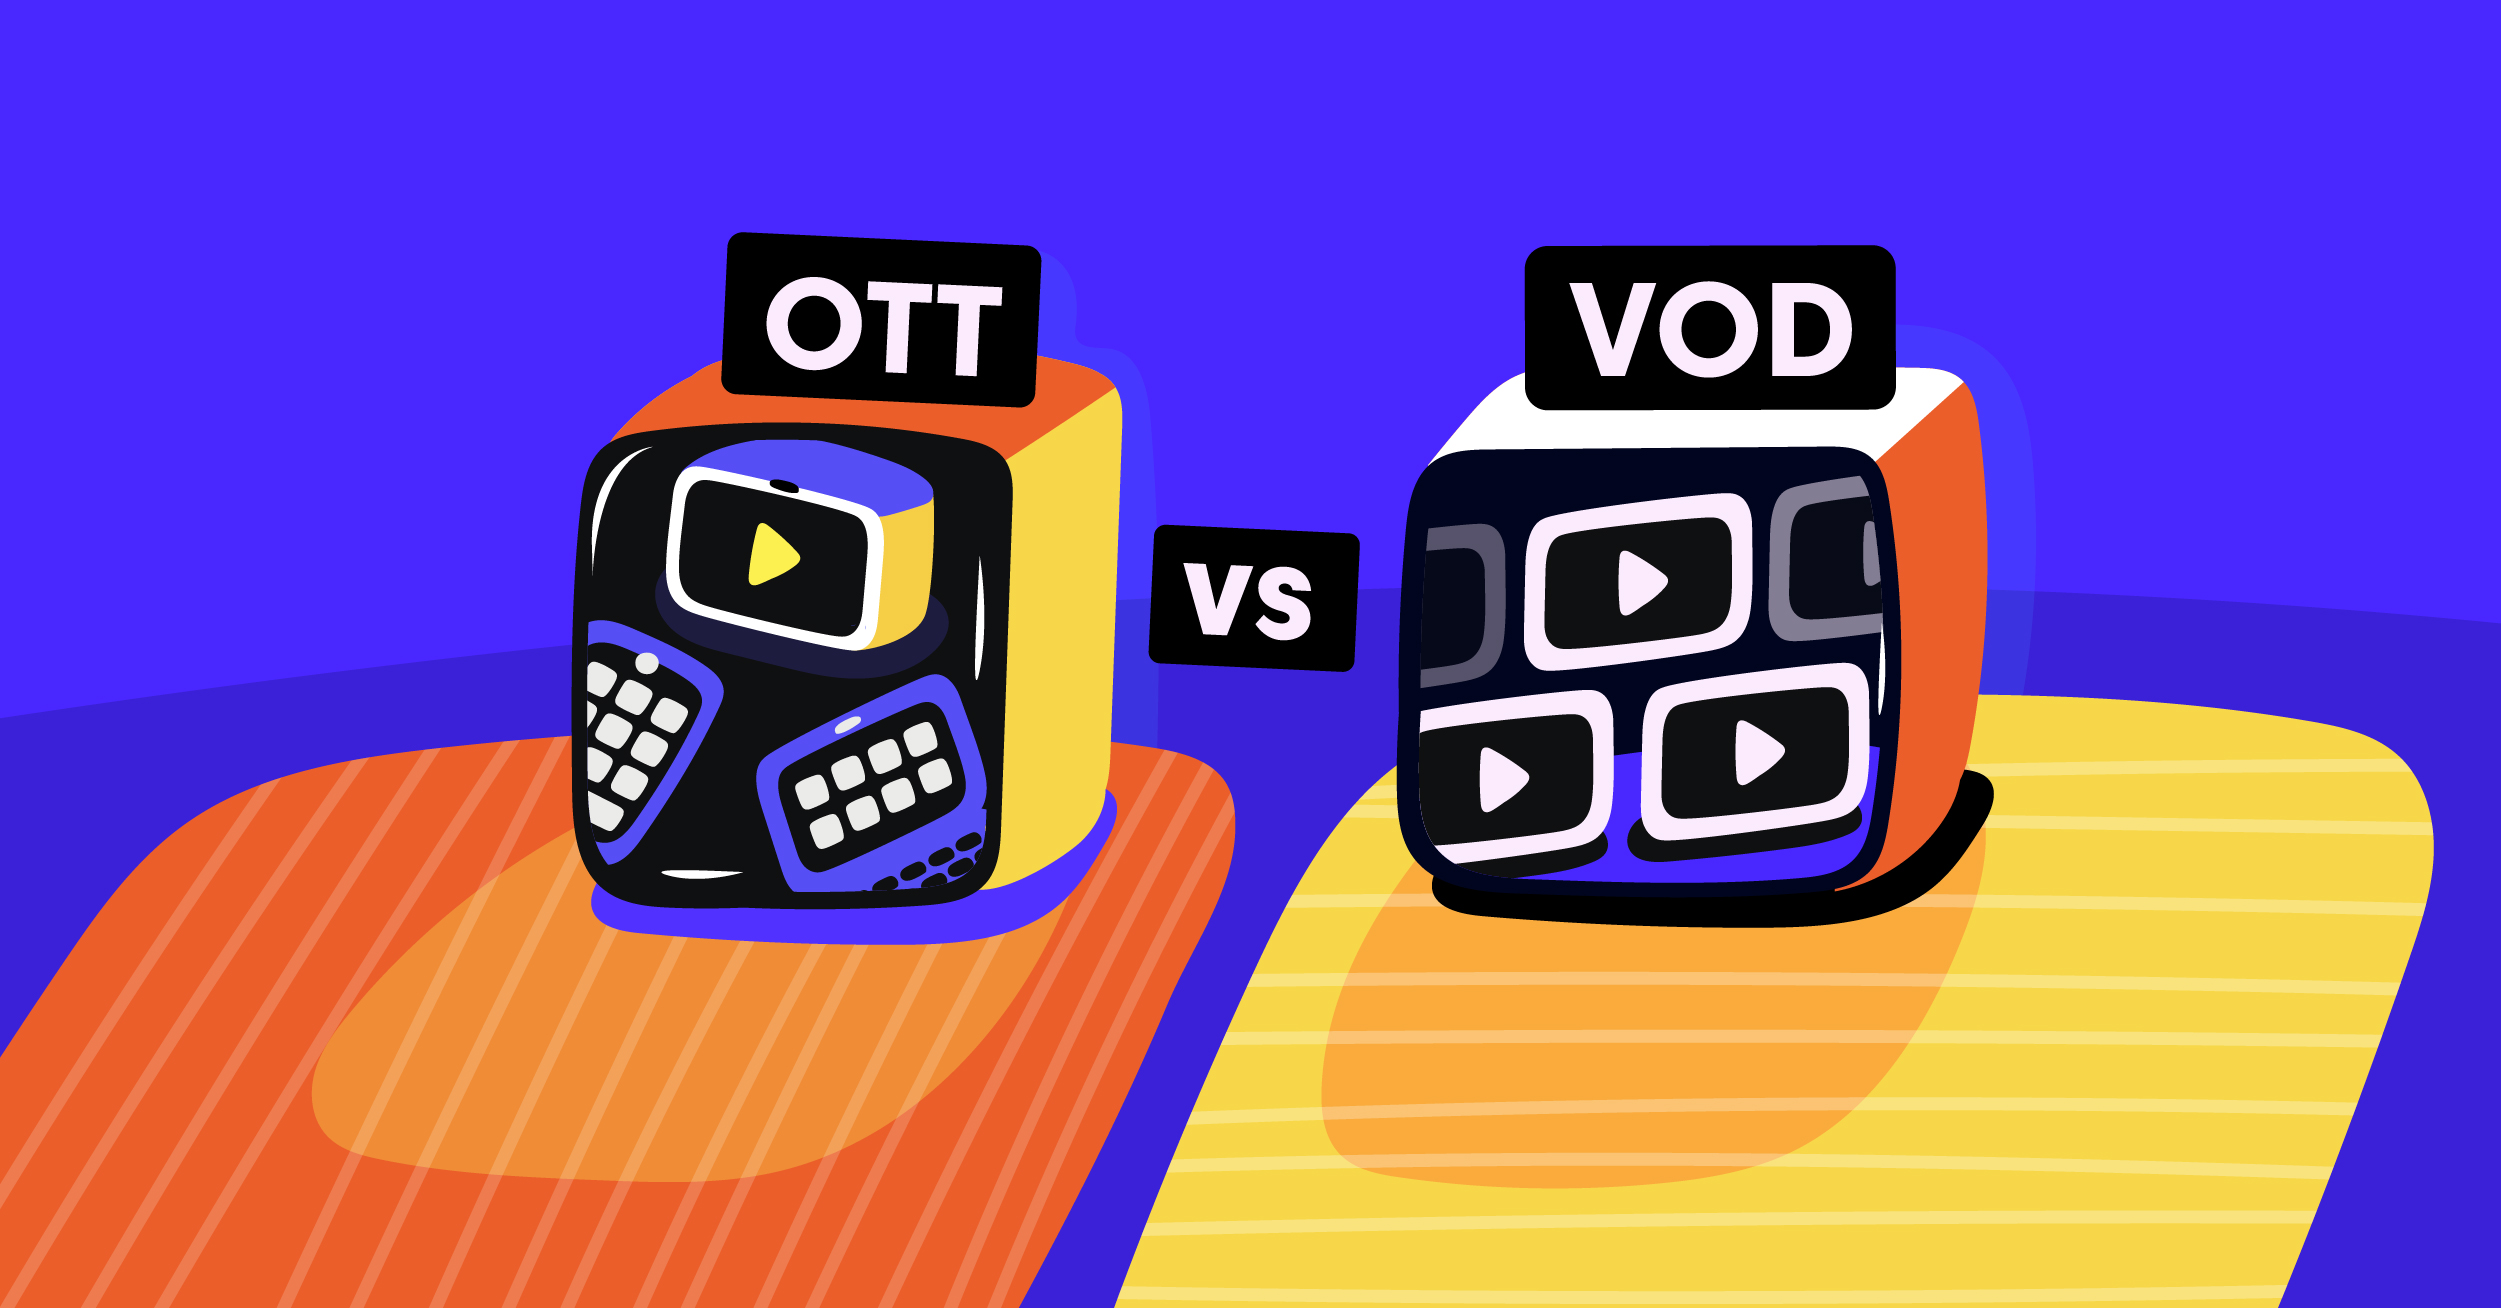 OTT vs. VOD: What’s the Difference?